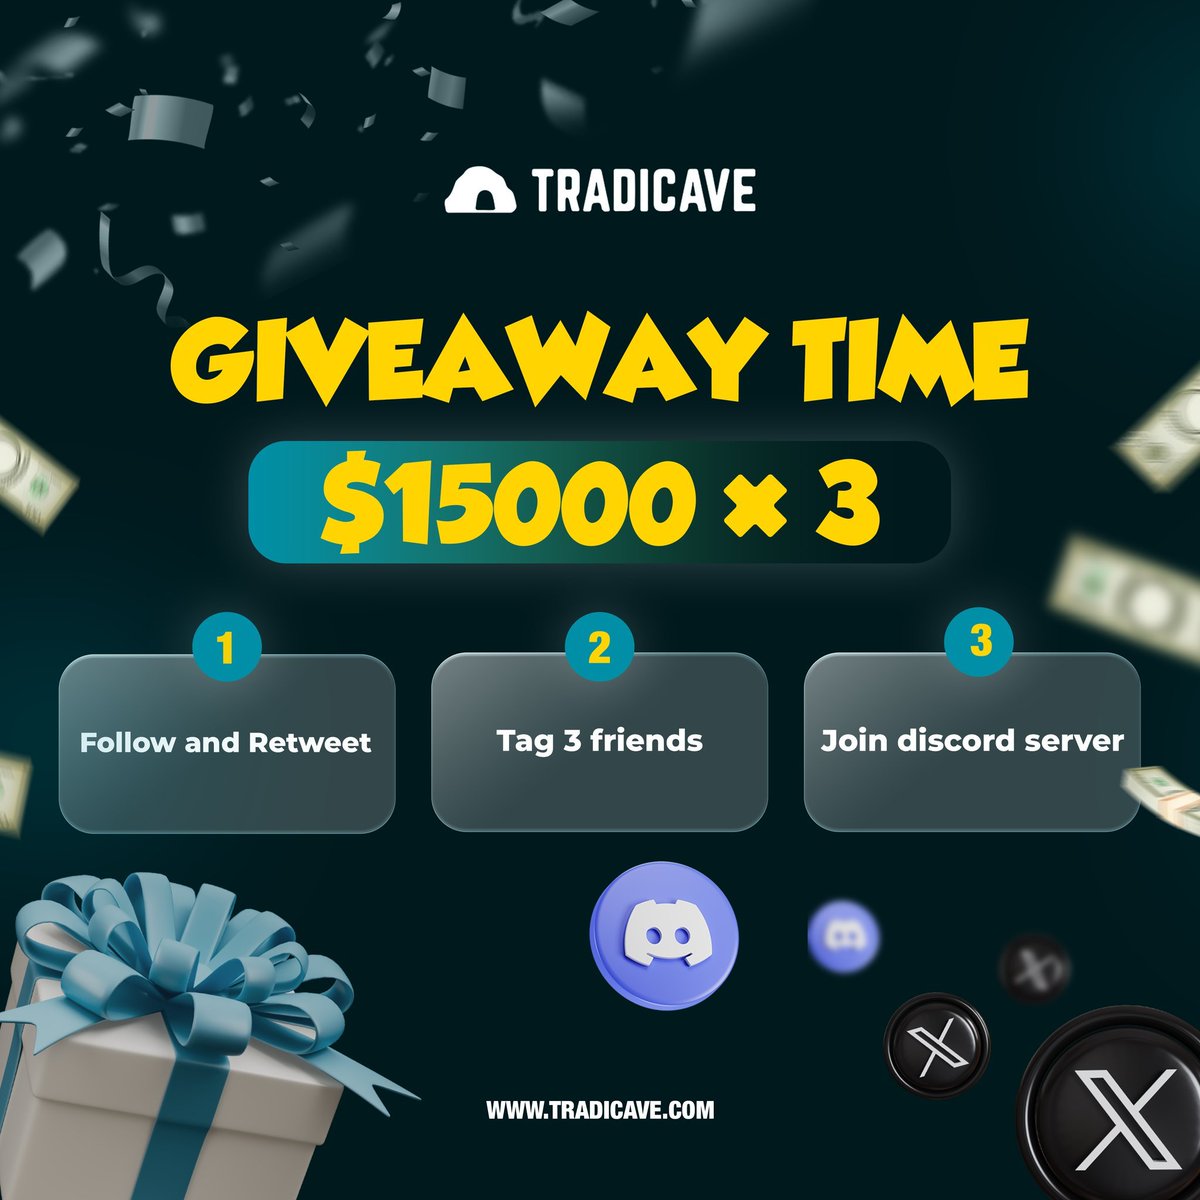 3x15 Giveaway! Rules ✨Follow @Tradicave @Aizen7_ also follow @MirKhan_Fx @Eliorz_Fx @Range_Breaker @BilalKhan_Fx @Zay_trades_fx ✨Follow Tradicave Facebook ✨Like, RT tag 4 traders Join discord discord.com/invite/tradica… For more visit: tradicave.com Ends 19th